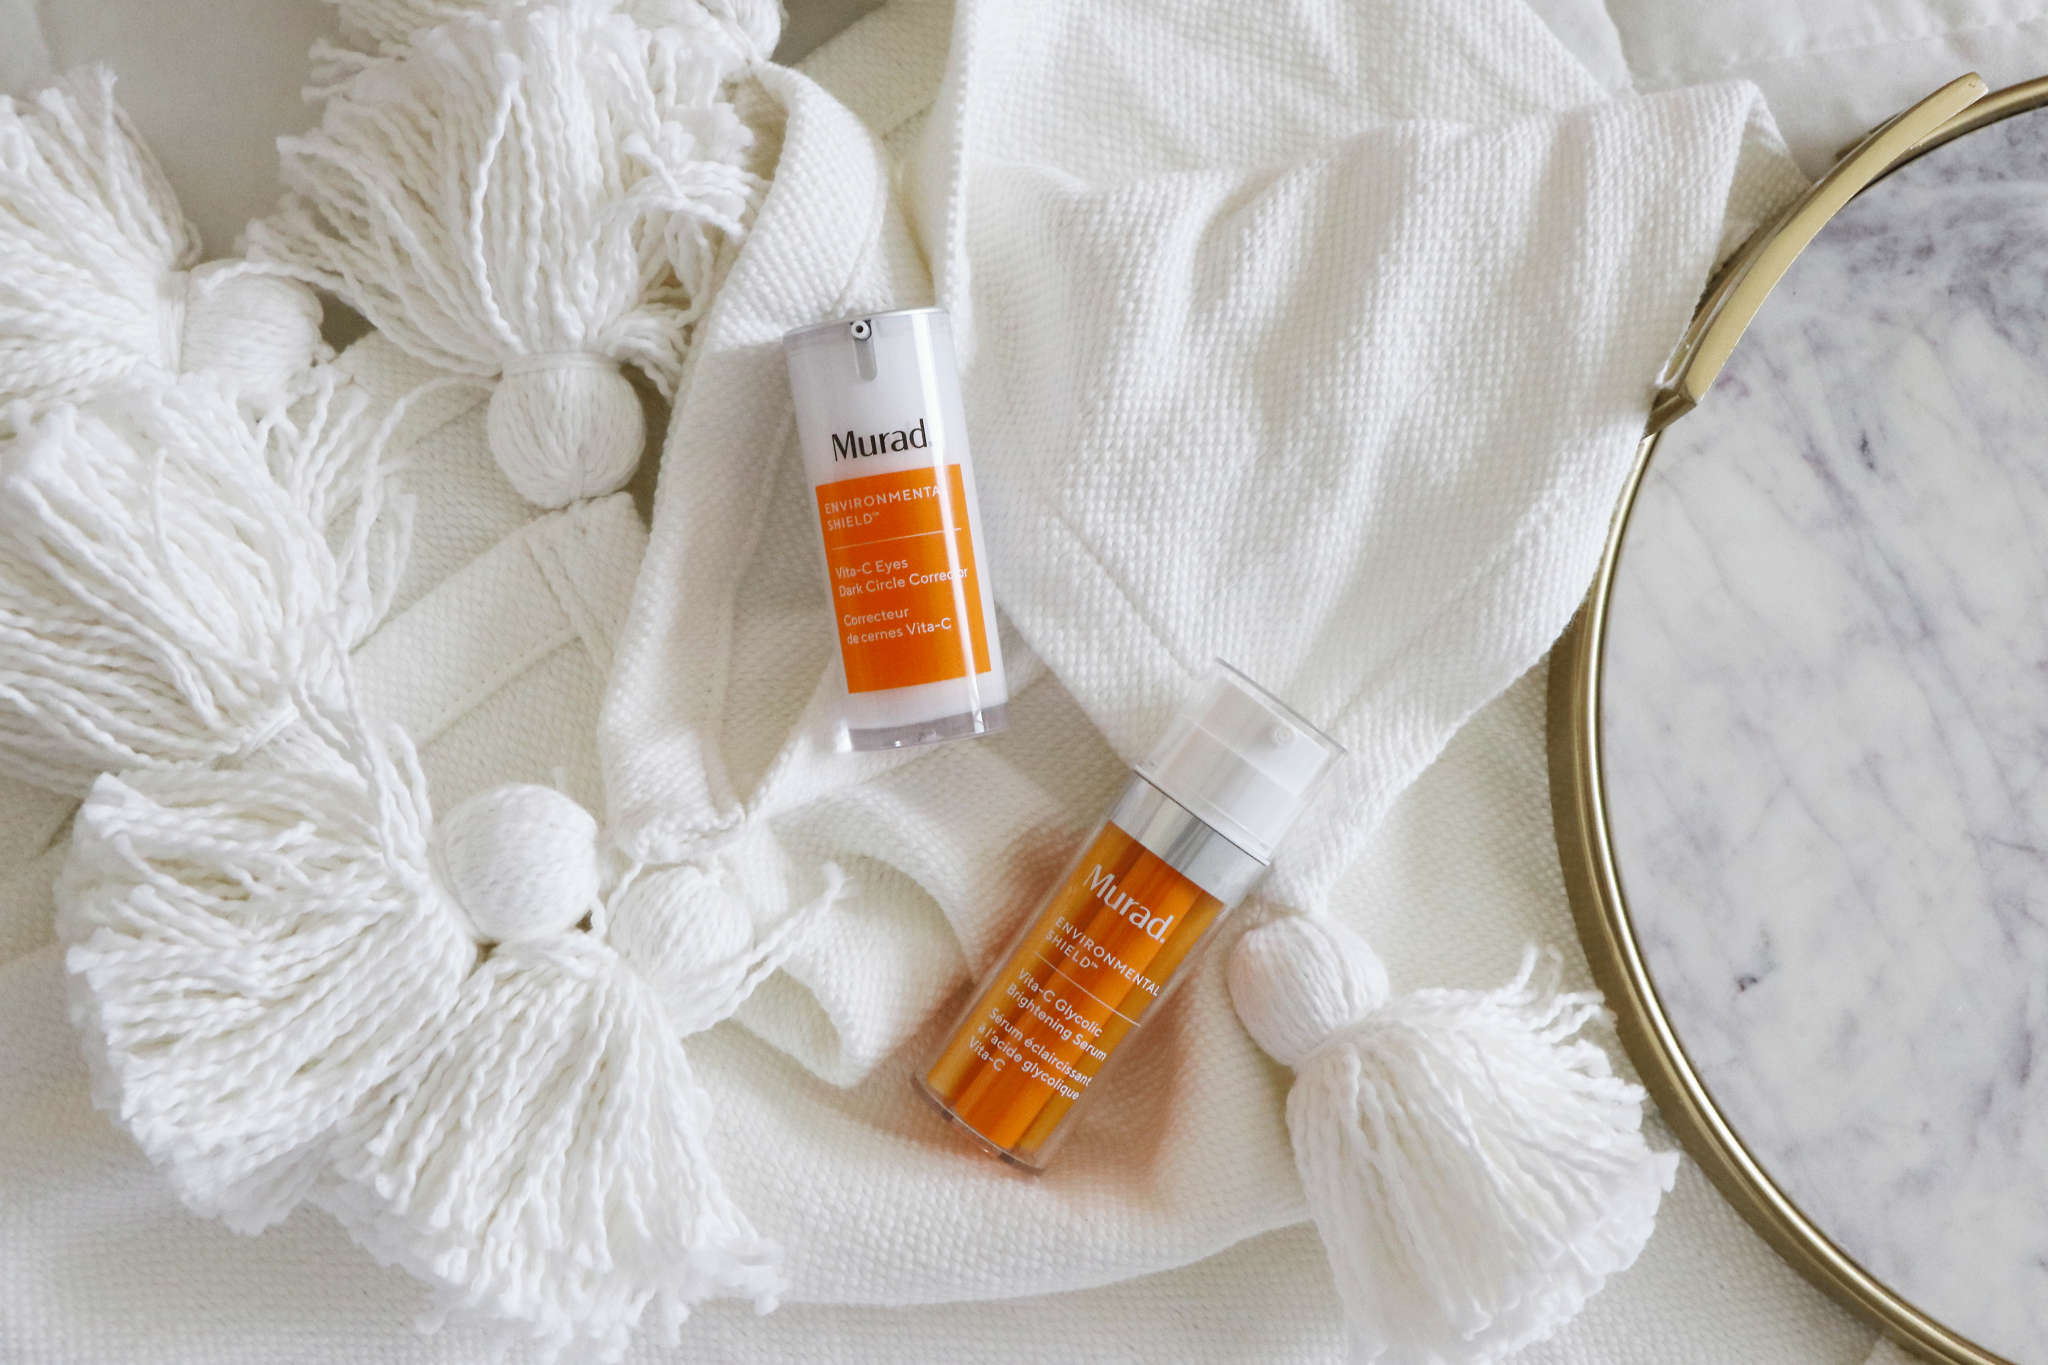 Curious why you need to incorporate Vitamin C into your skincare routine ASAP? Los Angeles Skincare Blogger Makeup Life and Love is sharing why you need it and a few of her top favorite Vitamin C serums for each skin type. 